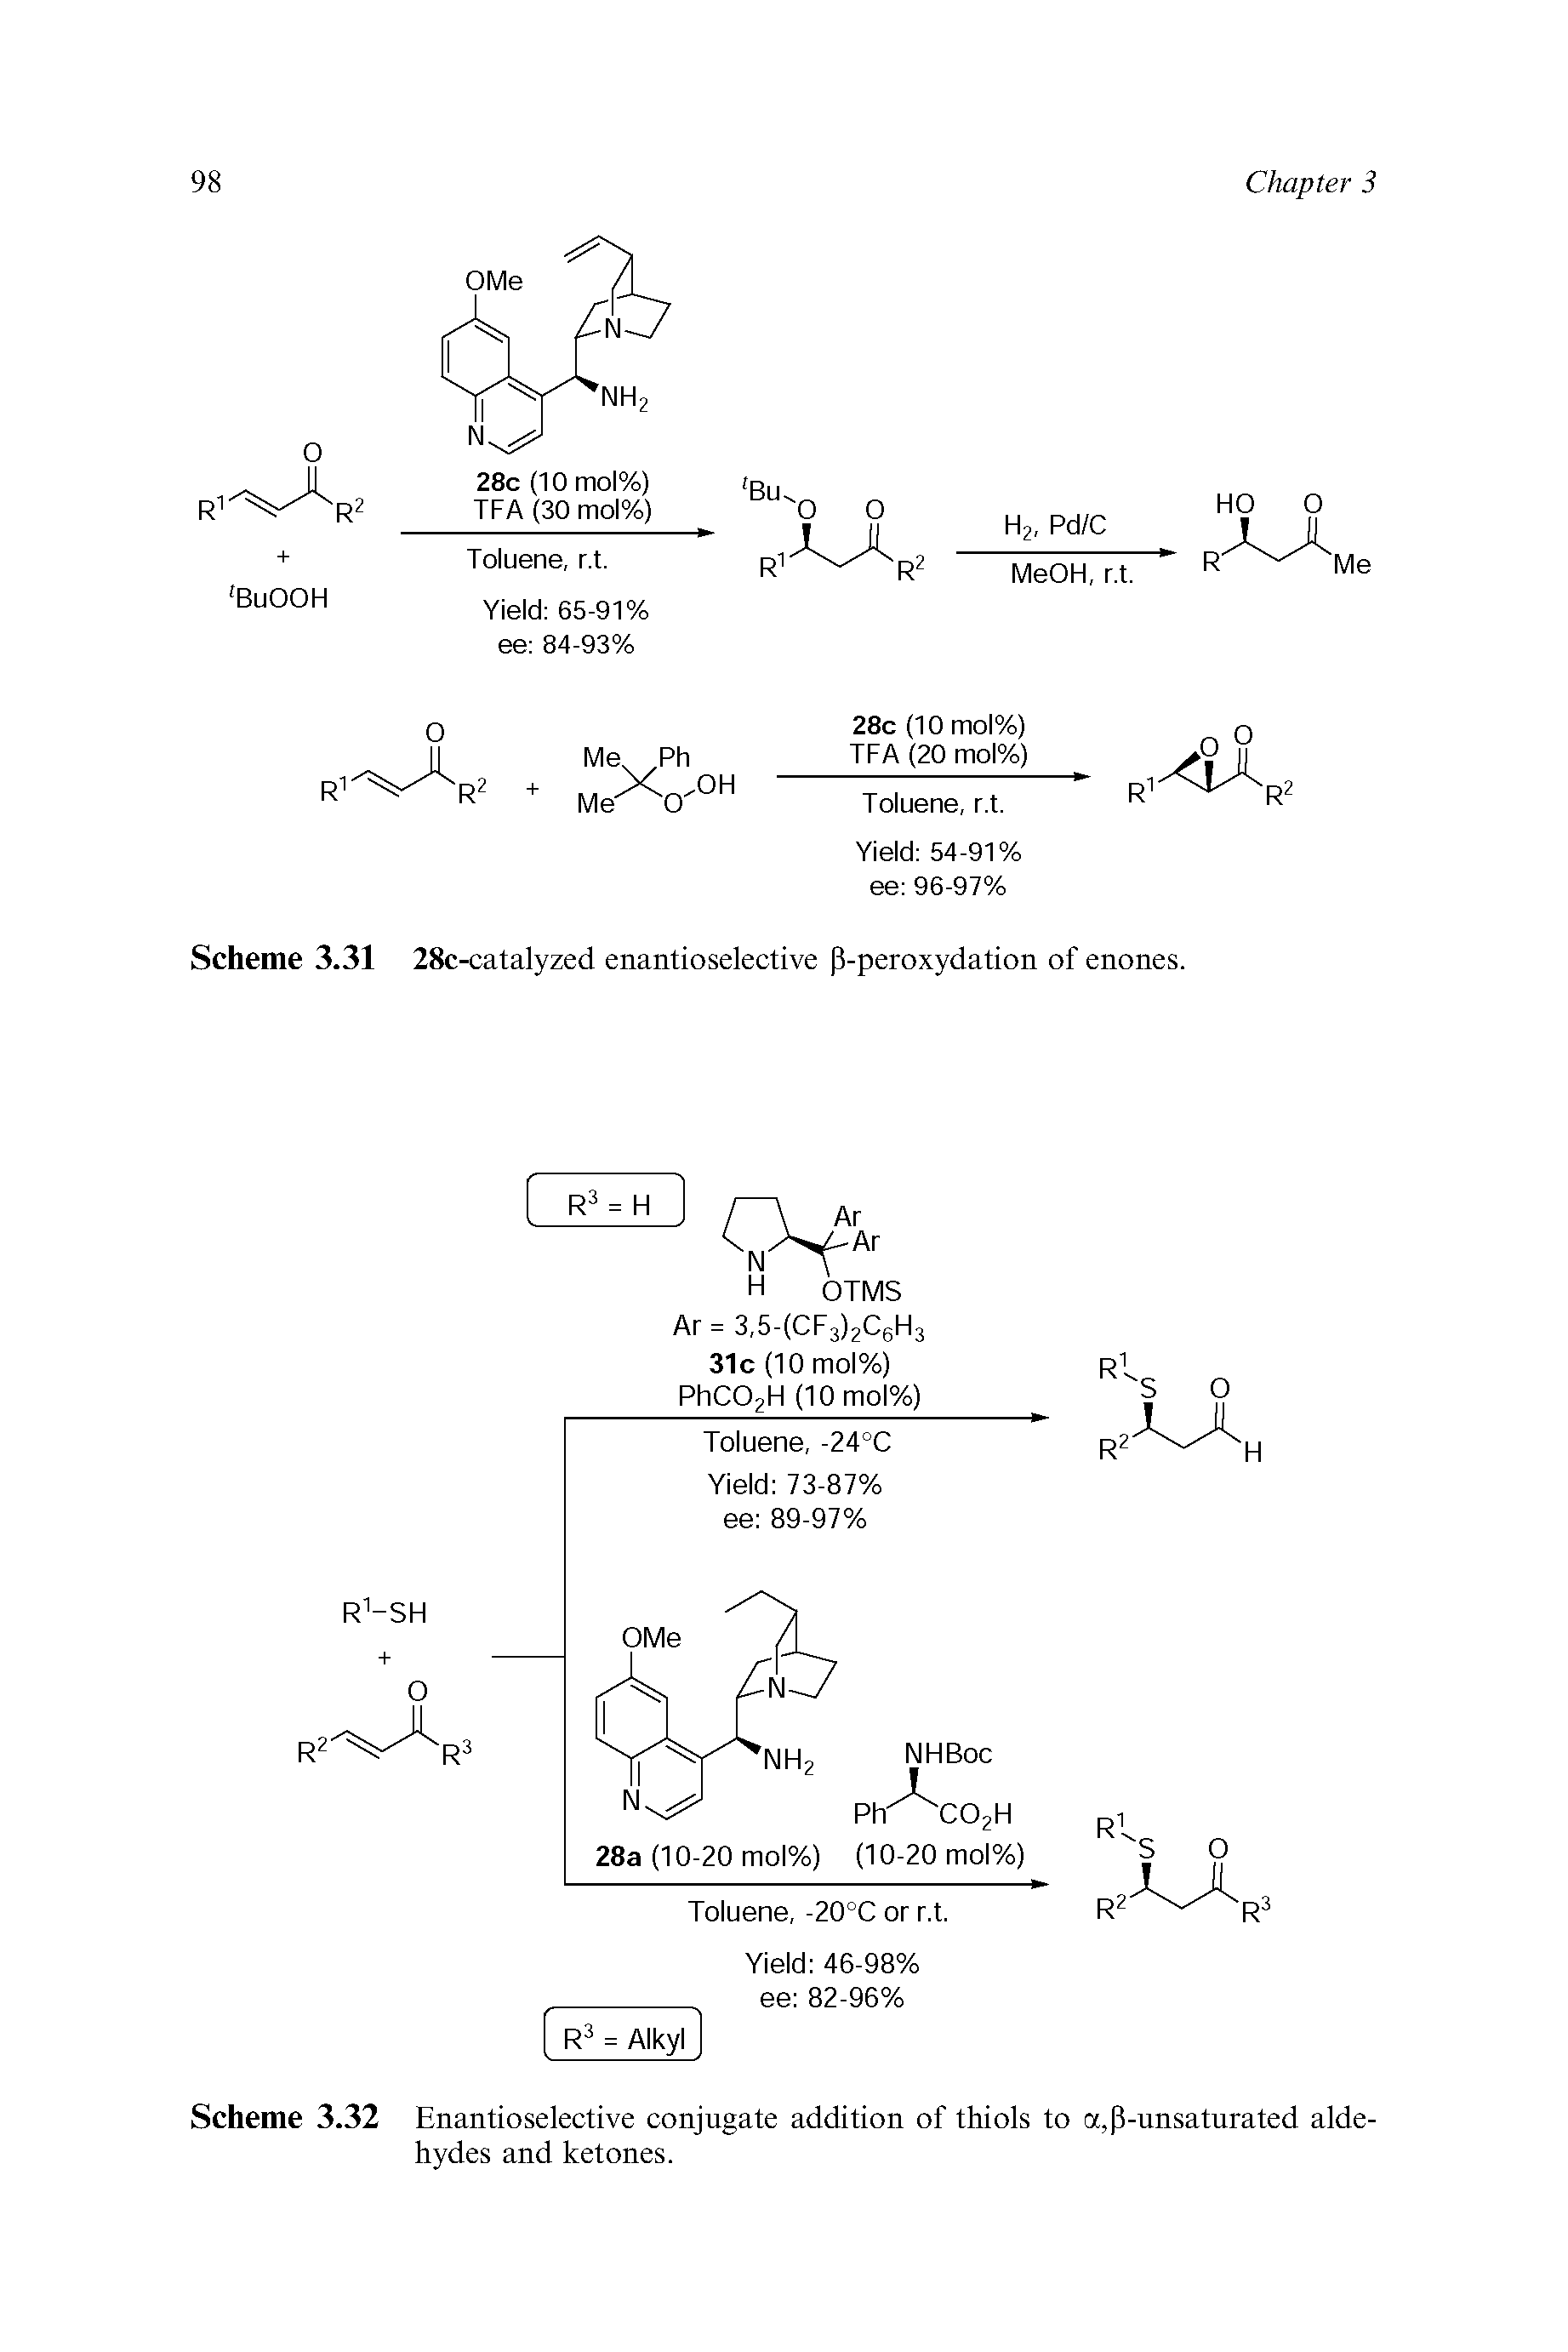 Scheme 3.32 Enantioselective conjugate addition of thiols to a,P-unsaturated aldehydes and ketones.